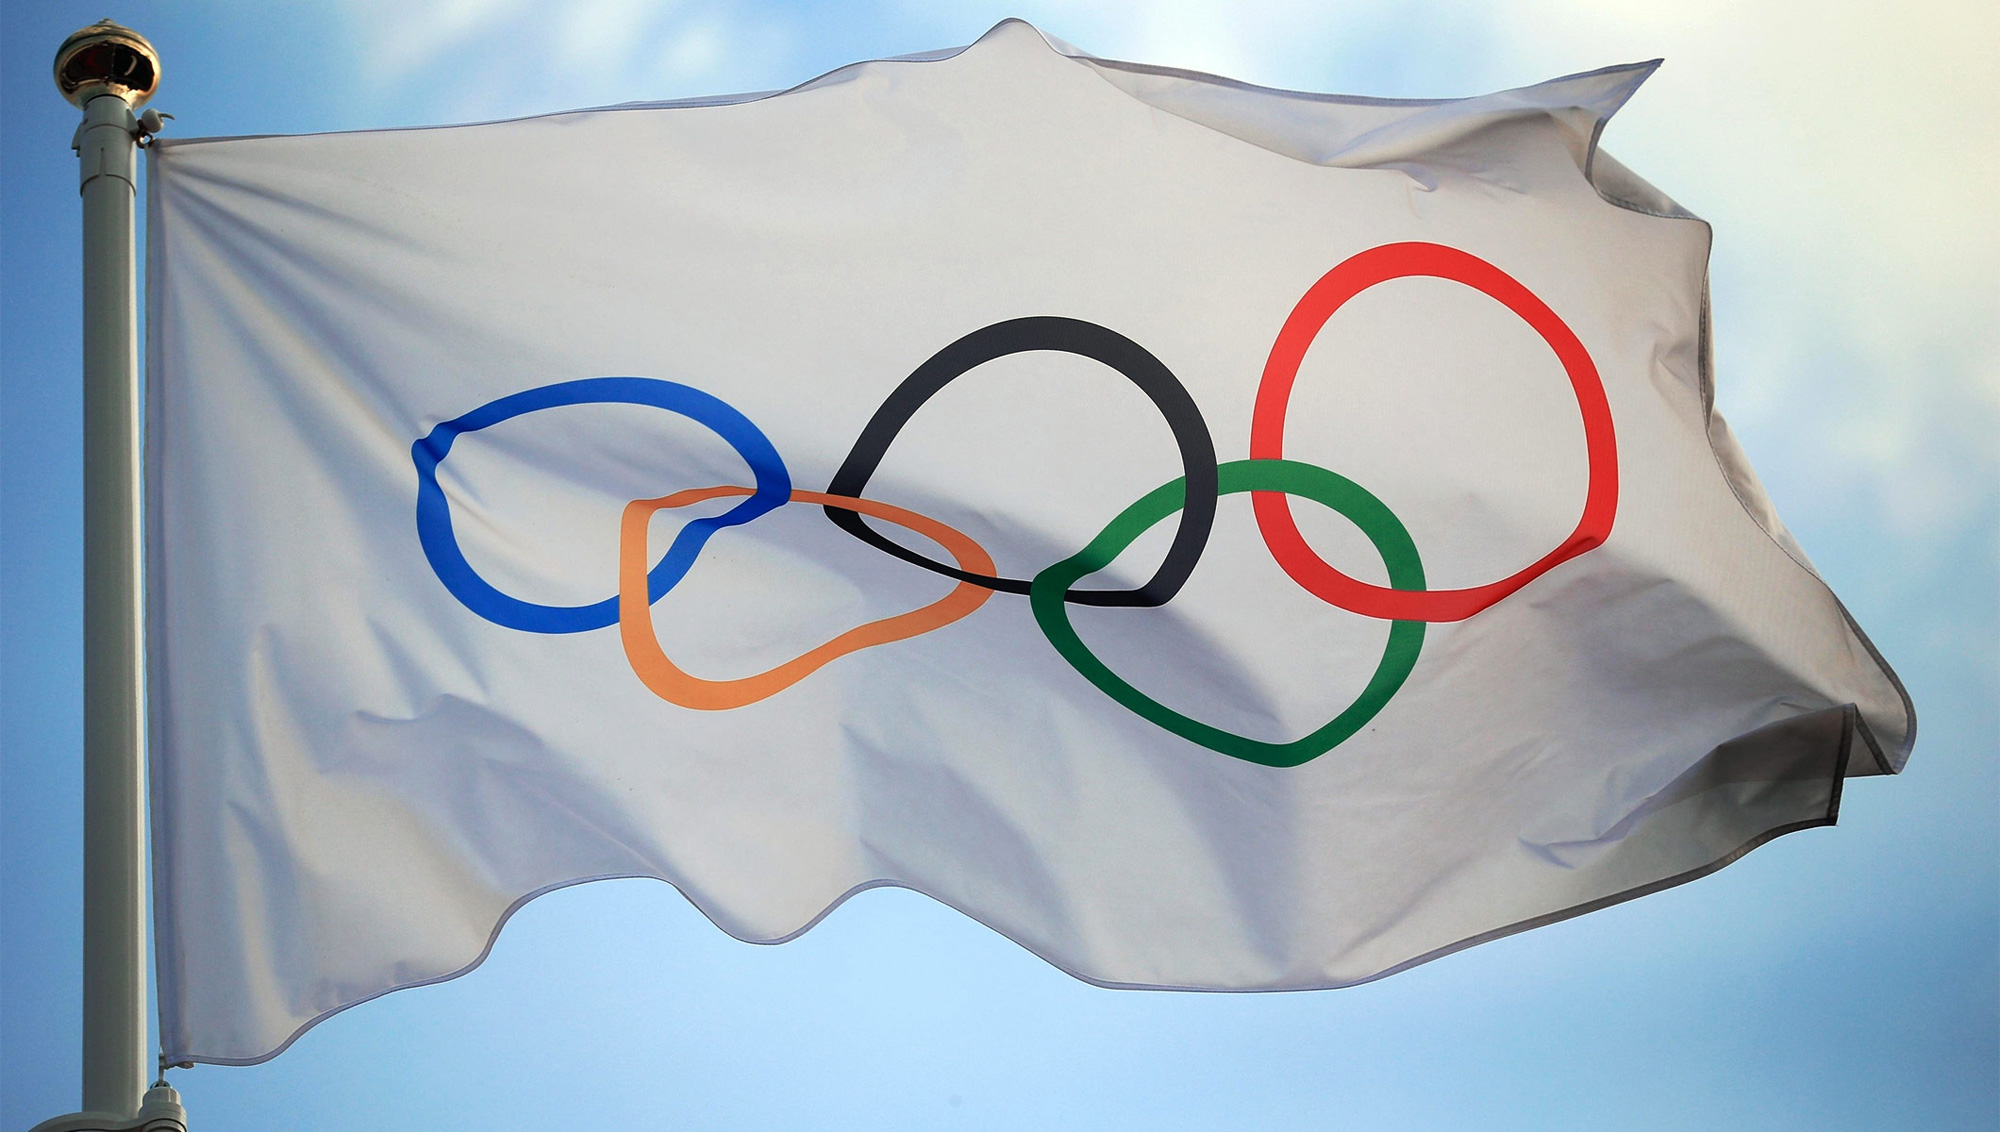 The International Olympic Committee has decided to suspend all discussions with the Indian Olympic Association on hosting sporting events after two Pakistani shooters were denied visas to compete in the ongoing World Cup in New Delhi after the Pulwama terror attack.